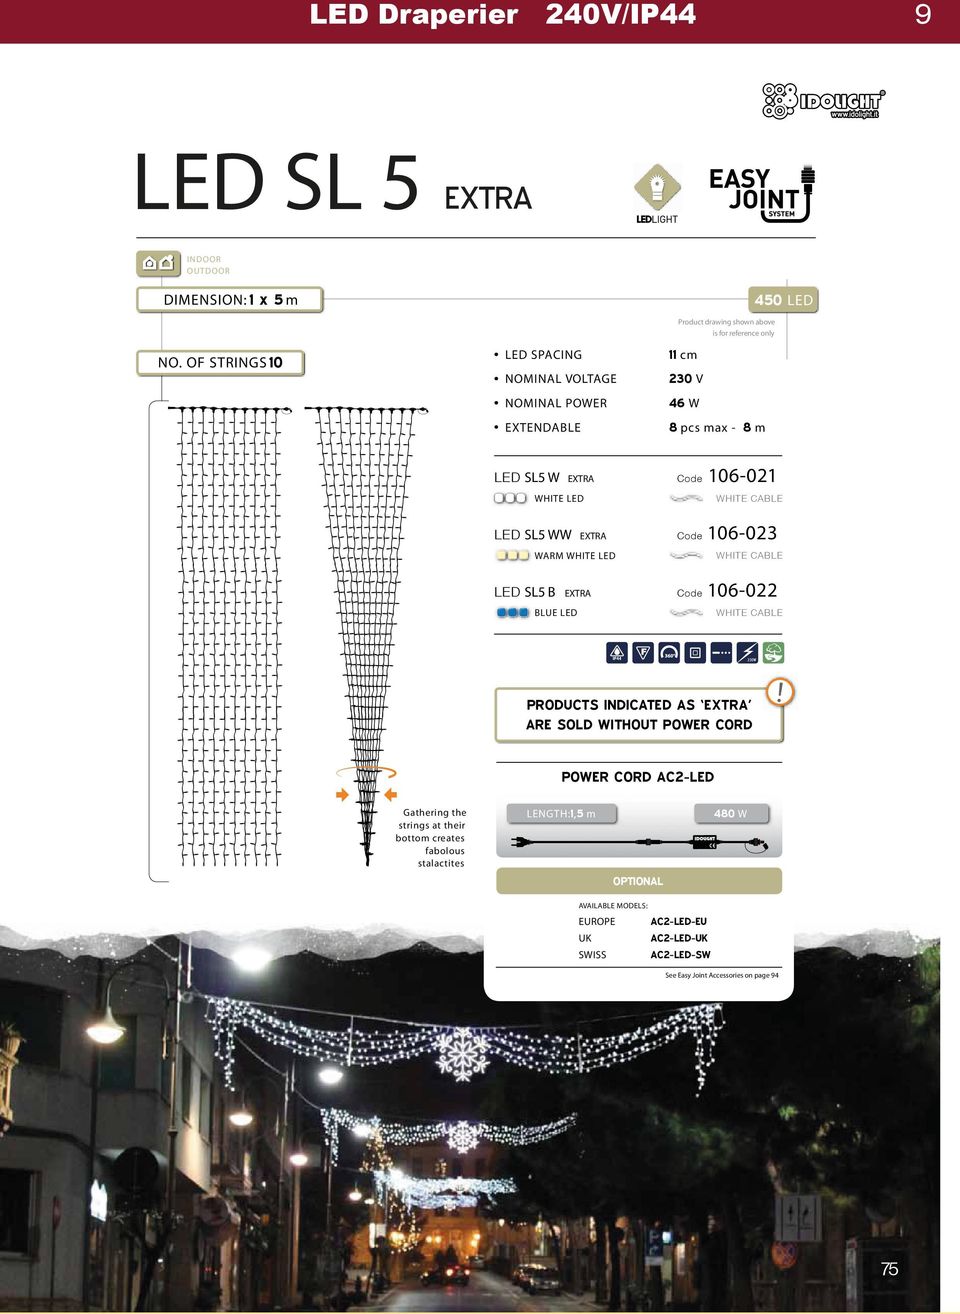 106-021 WHITE LED WHITE CABLE LED SL5 WW EXTRA Code 106-023 WARM WHITE LED WHITE CABLE LED SL5 B EXTRA Code 106-022 BLUE LED WHITE CABLE PRODUCTS INDICATED AS EXTRA ARE